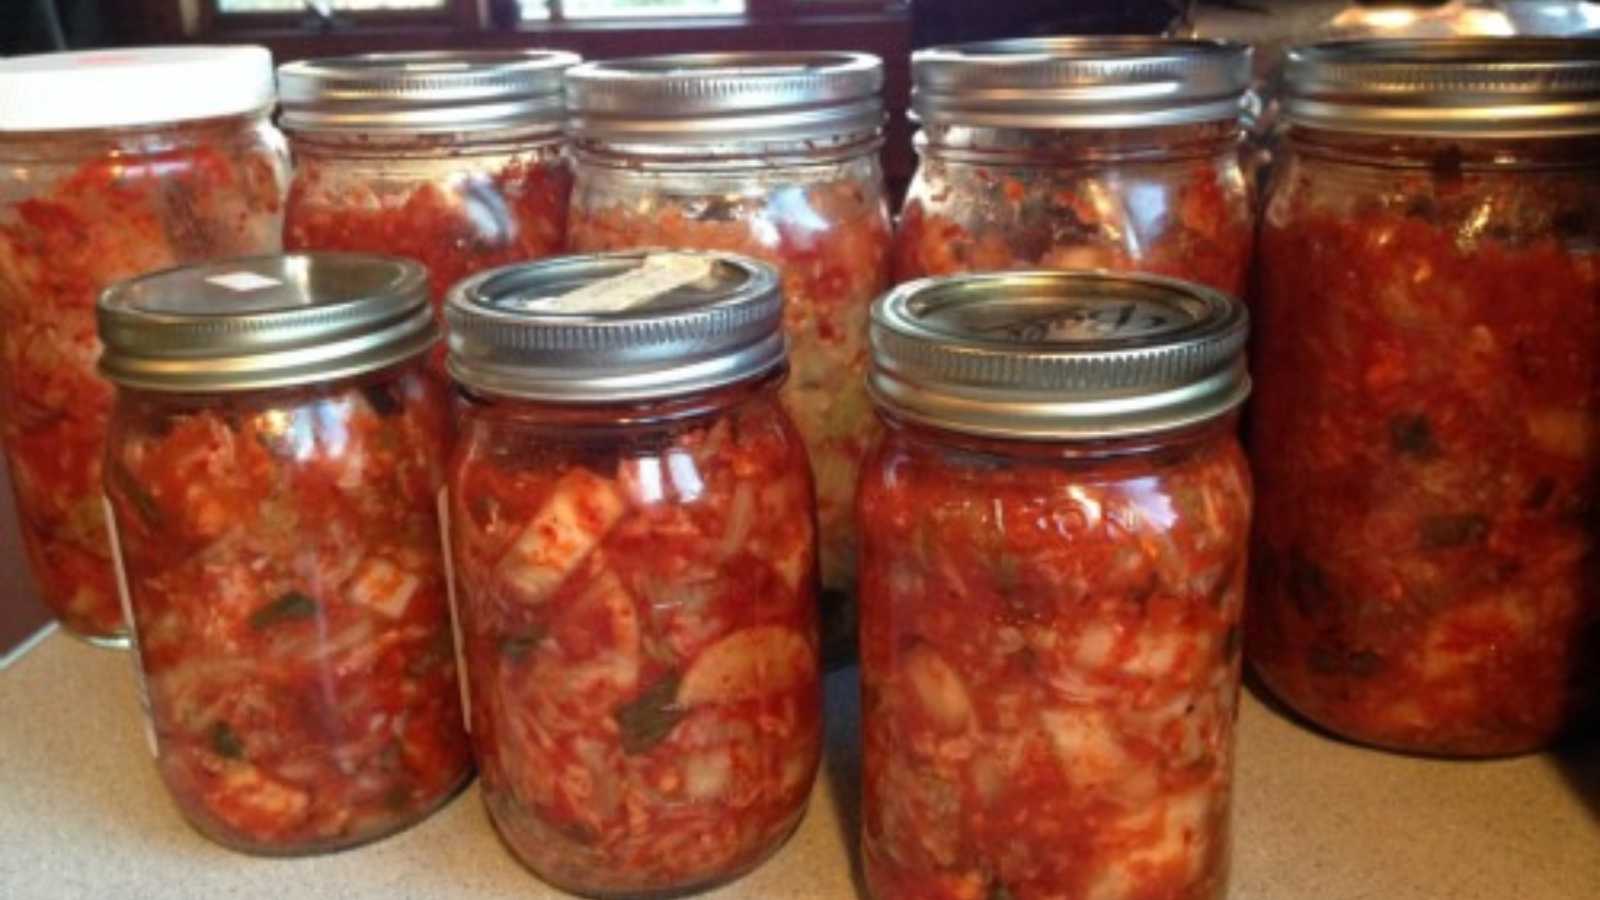 A jars of spicy kimchi.